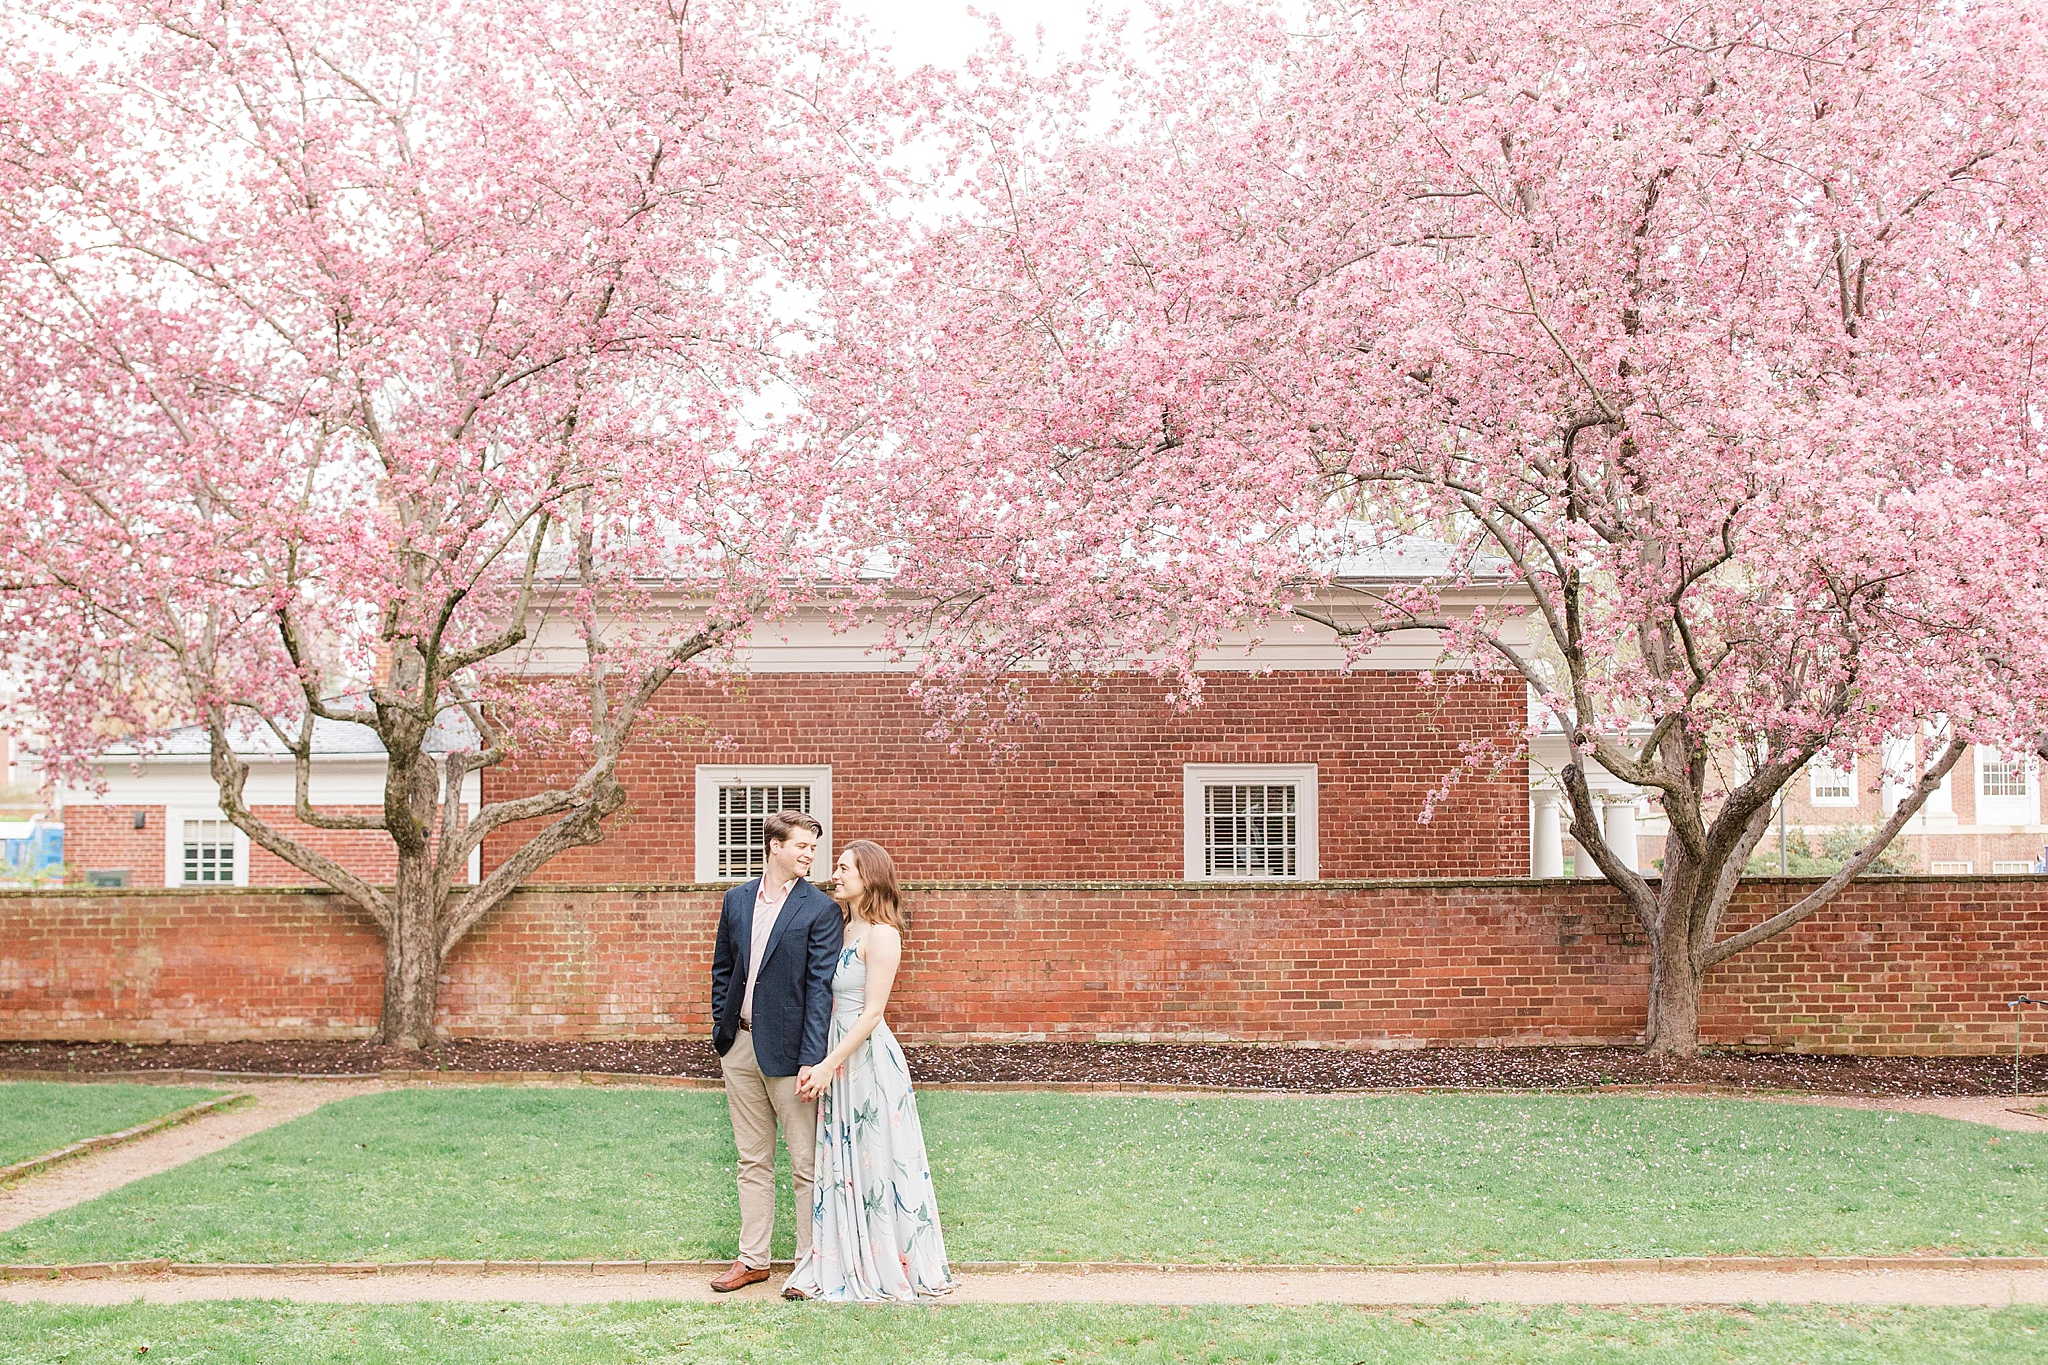 This fine art engagement session on the beautiful campus at the University of Virginia (UVA) includes the Rotunda, gardens, and other historic sites.  